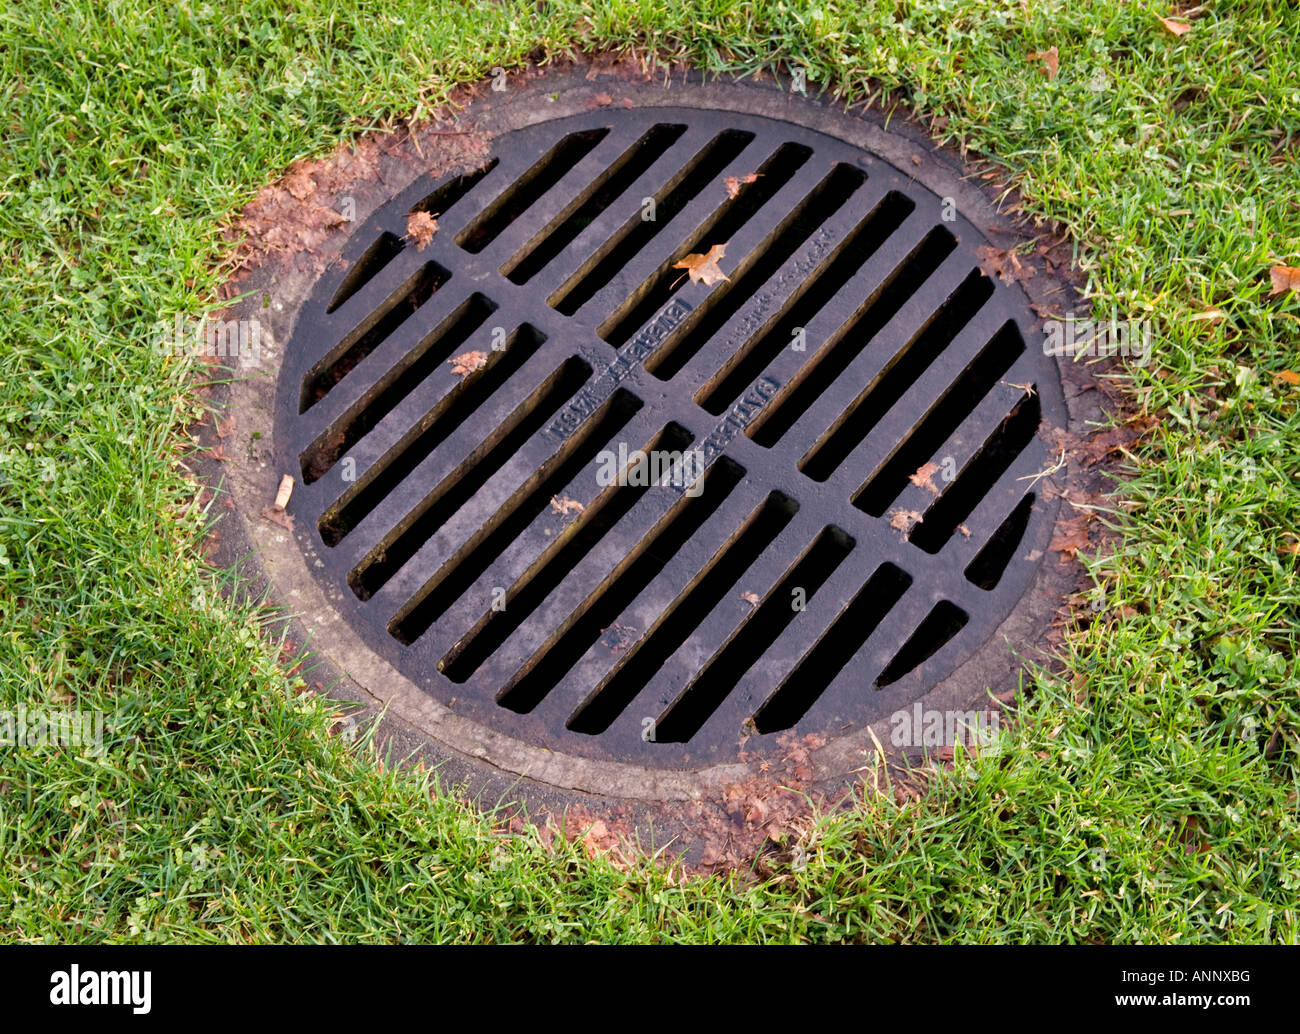 Storm sewer drain in a grassy area Stock Photo